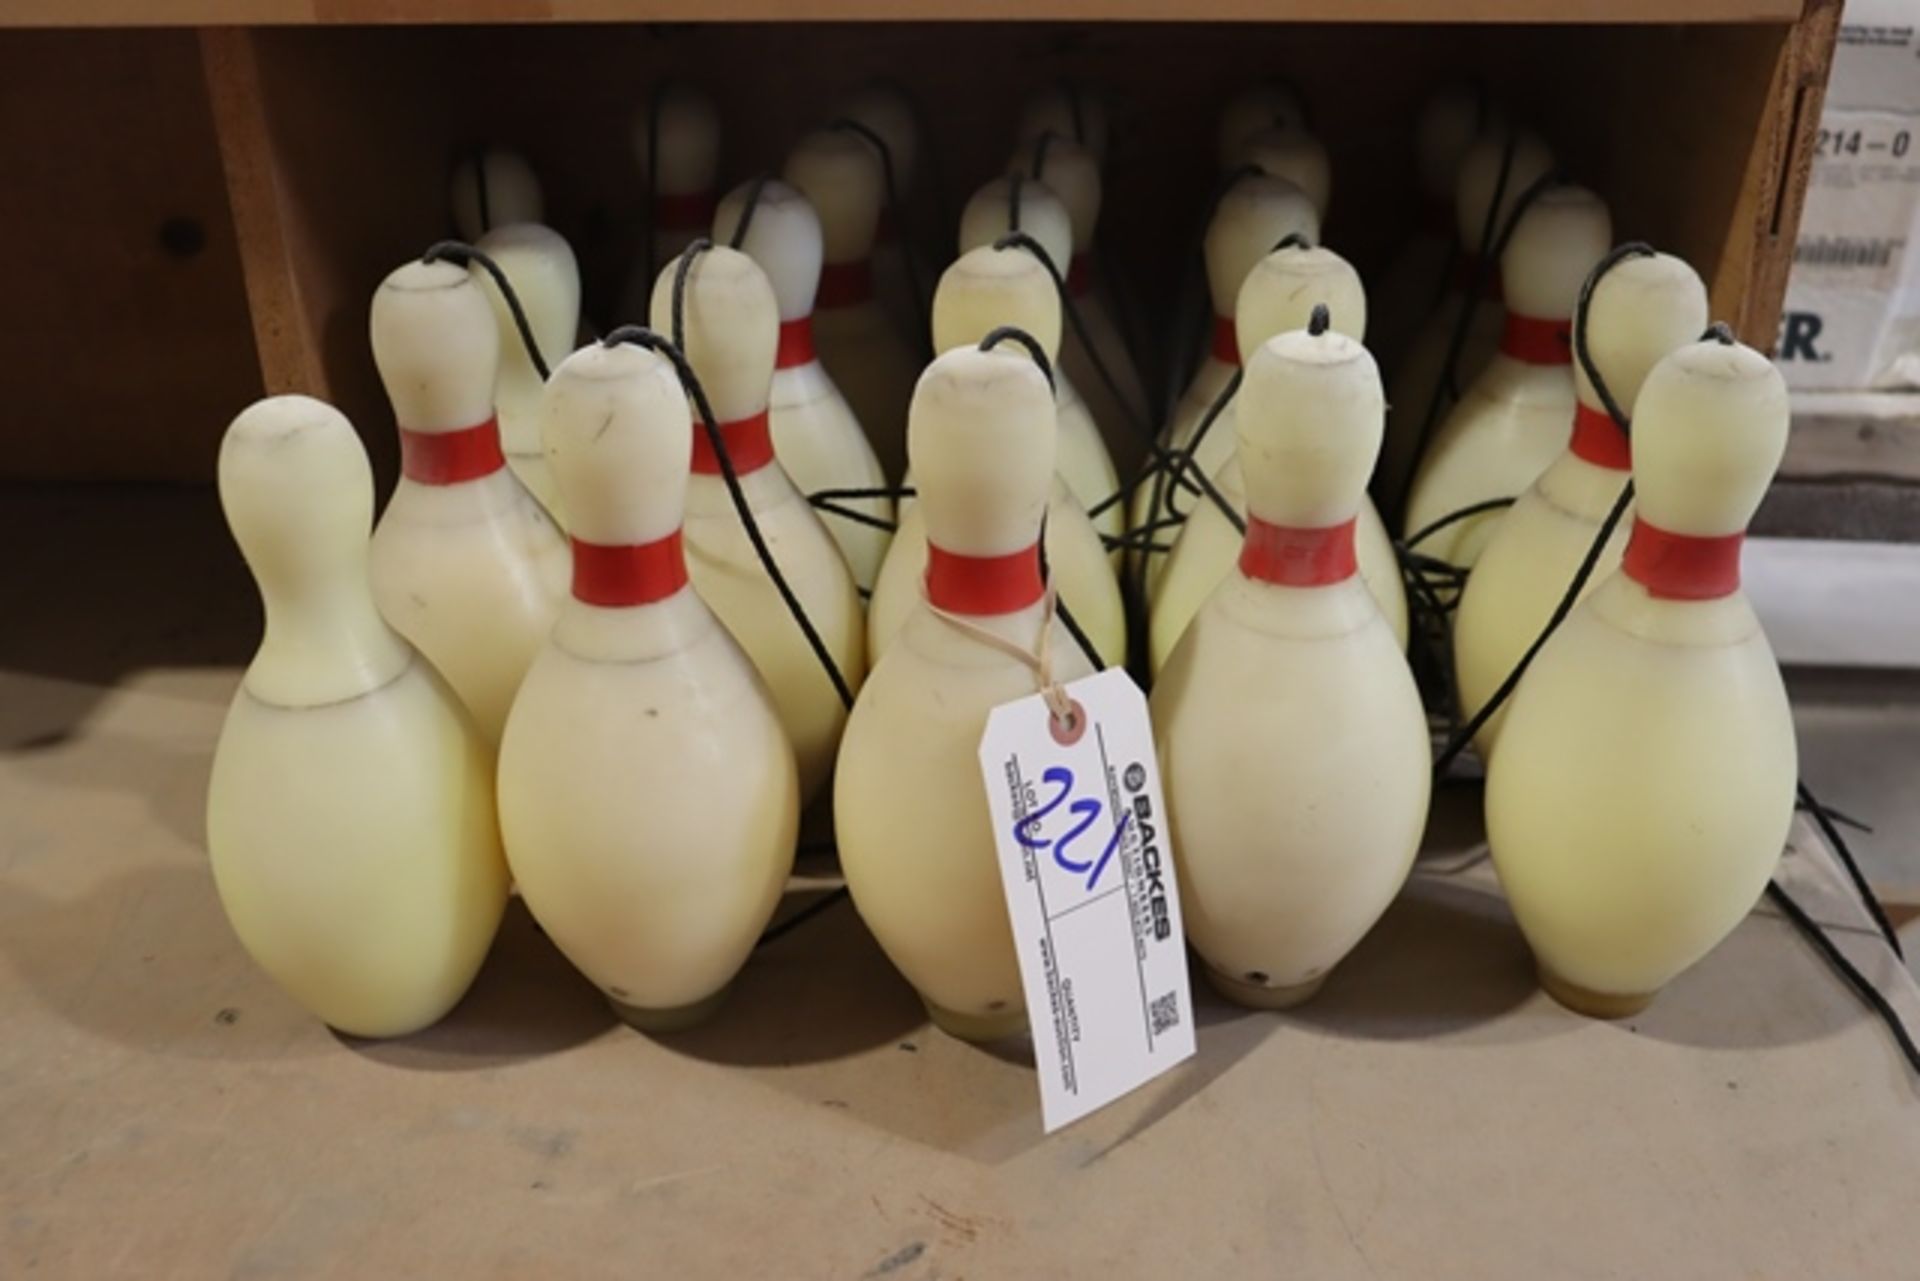 All to go - 9" bowling pins